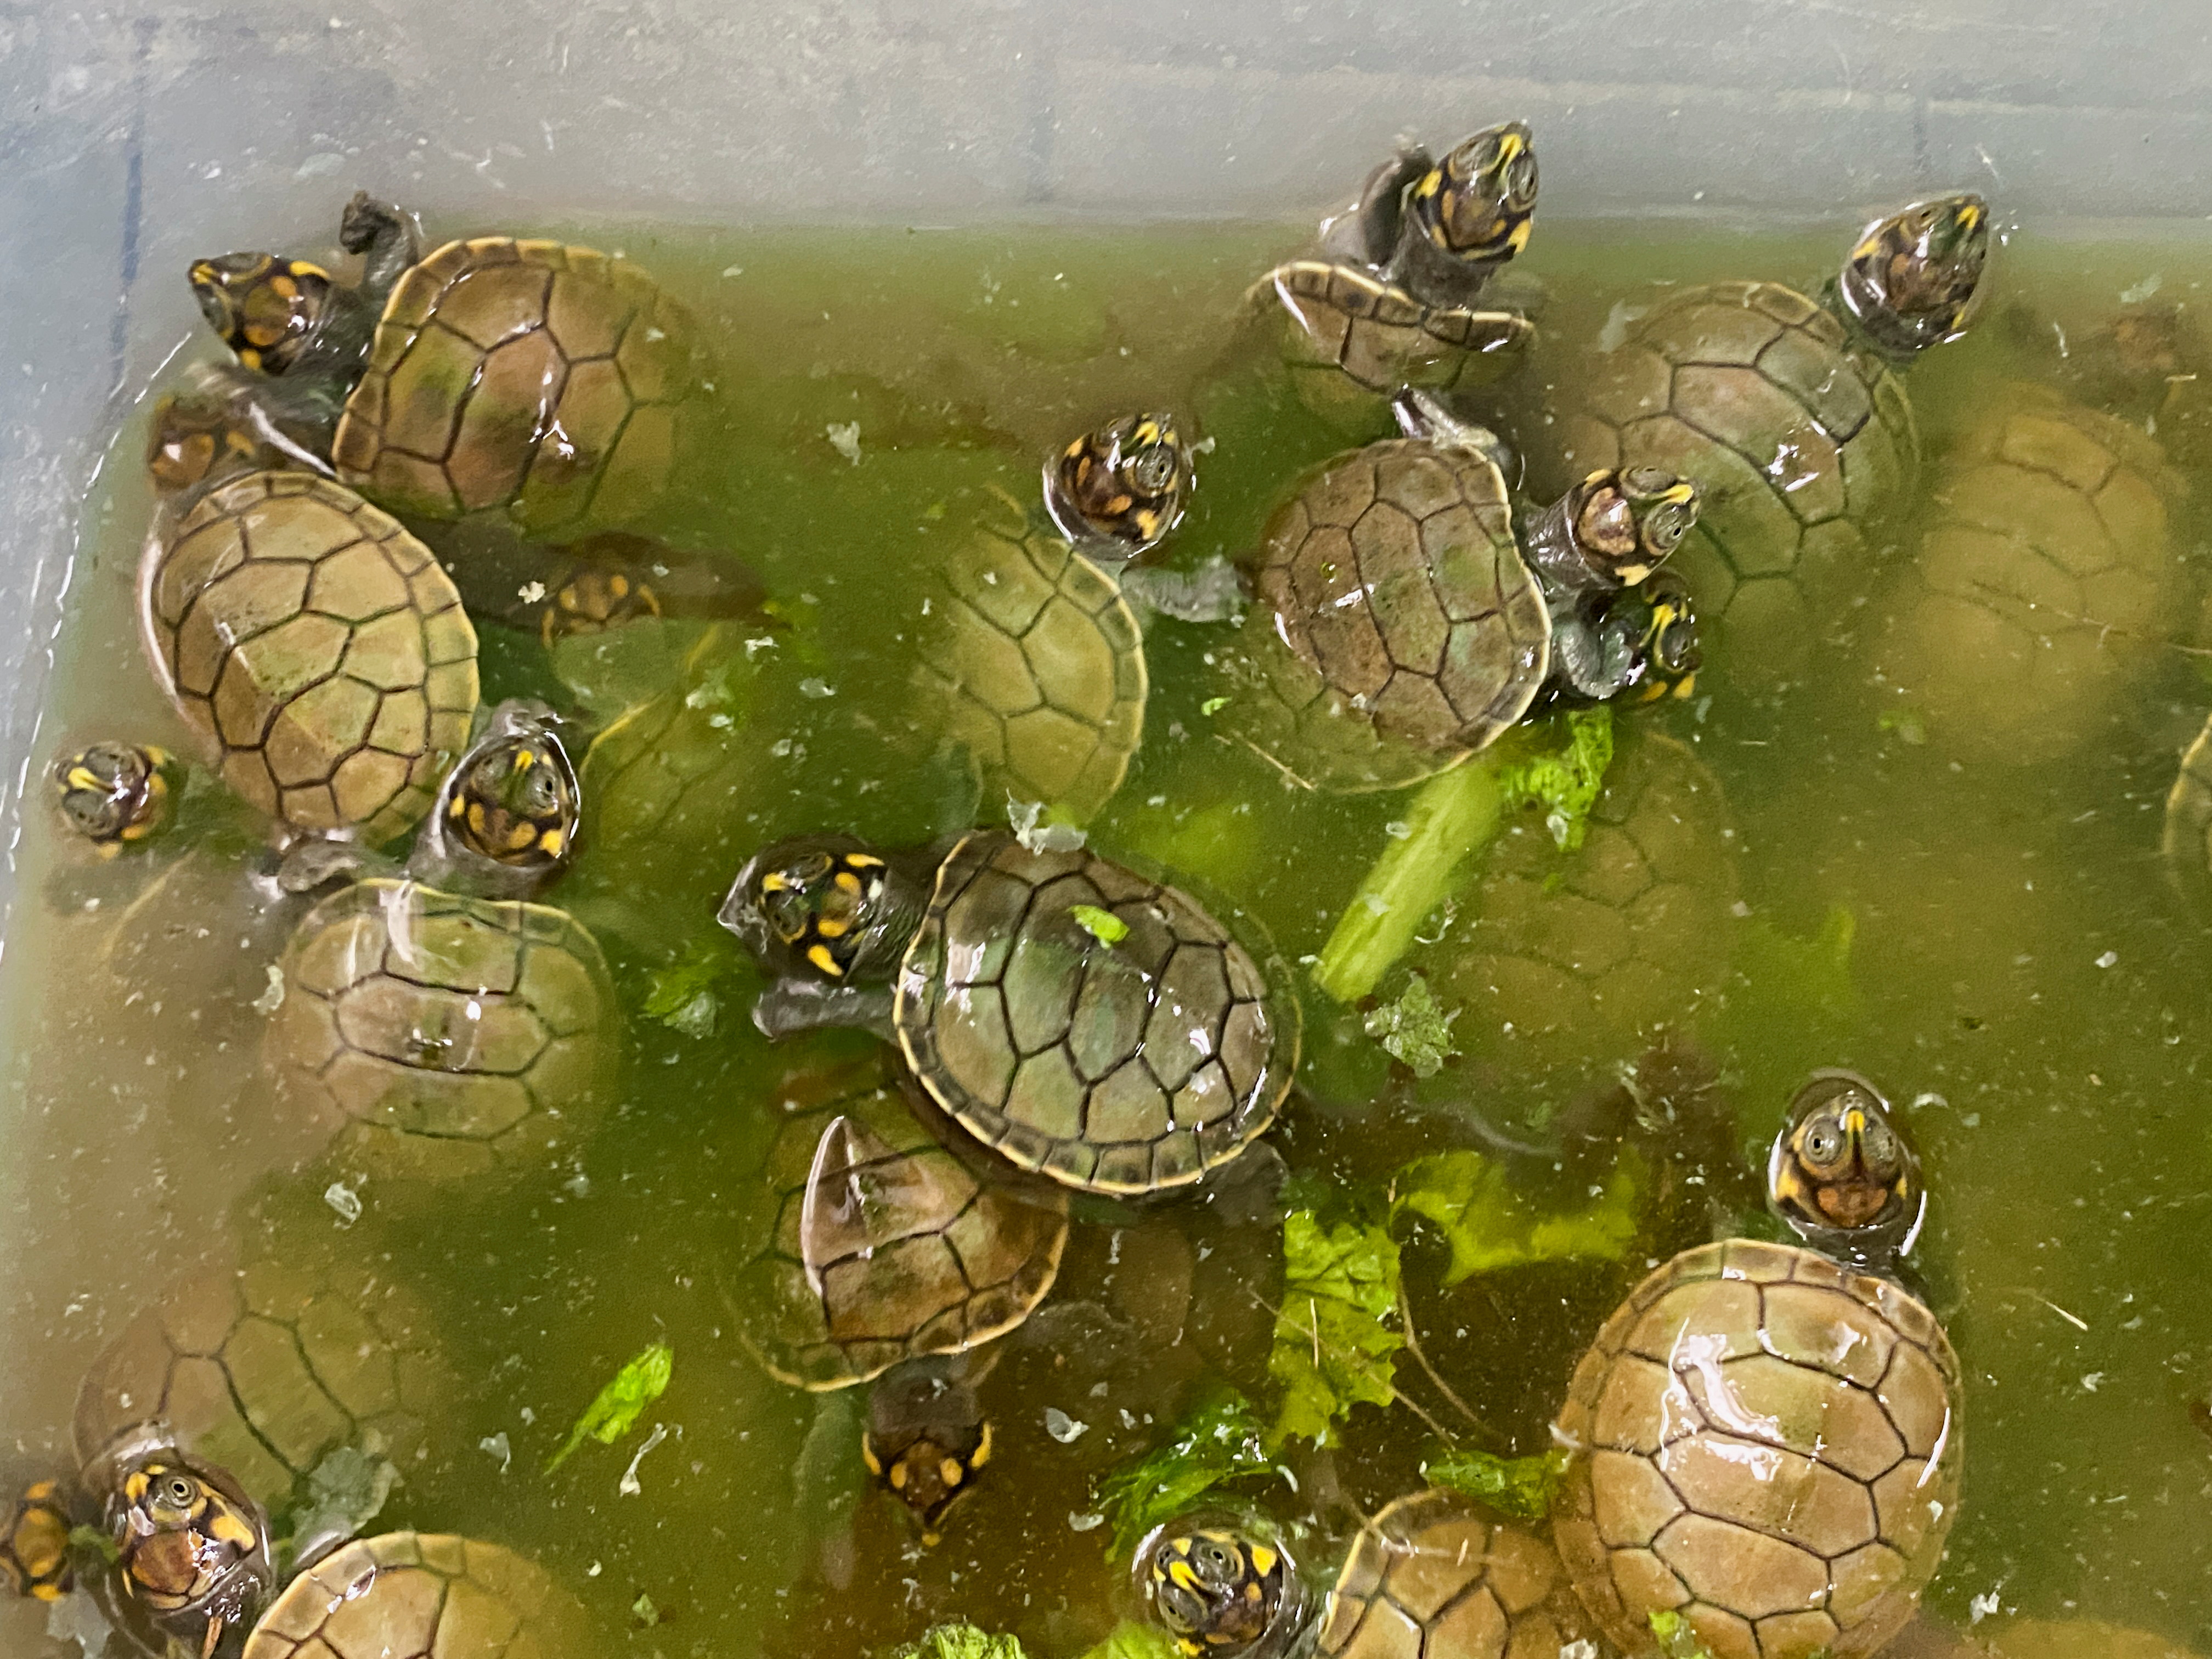 Baby river turtles native to the Amazon rainforest are seen before being freed, in Iquitos